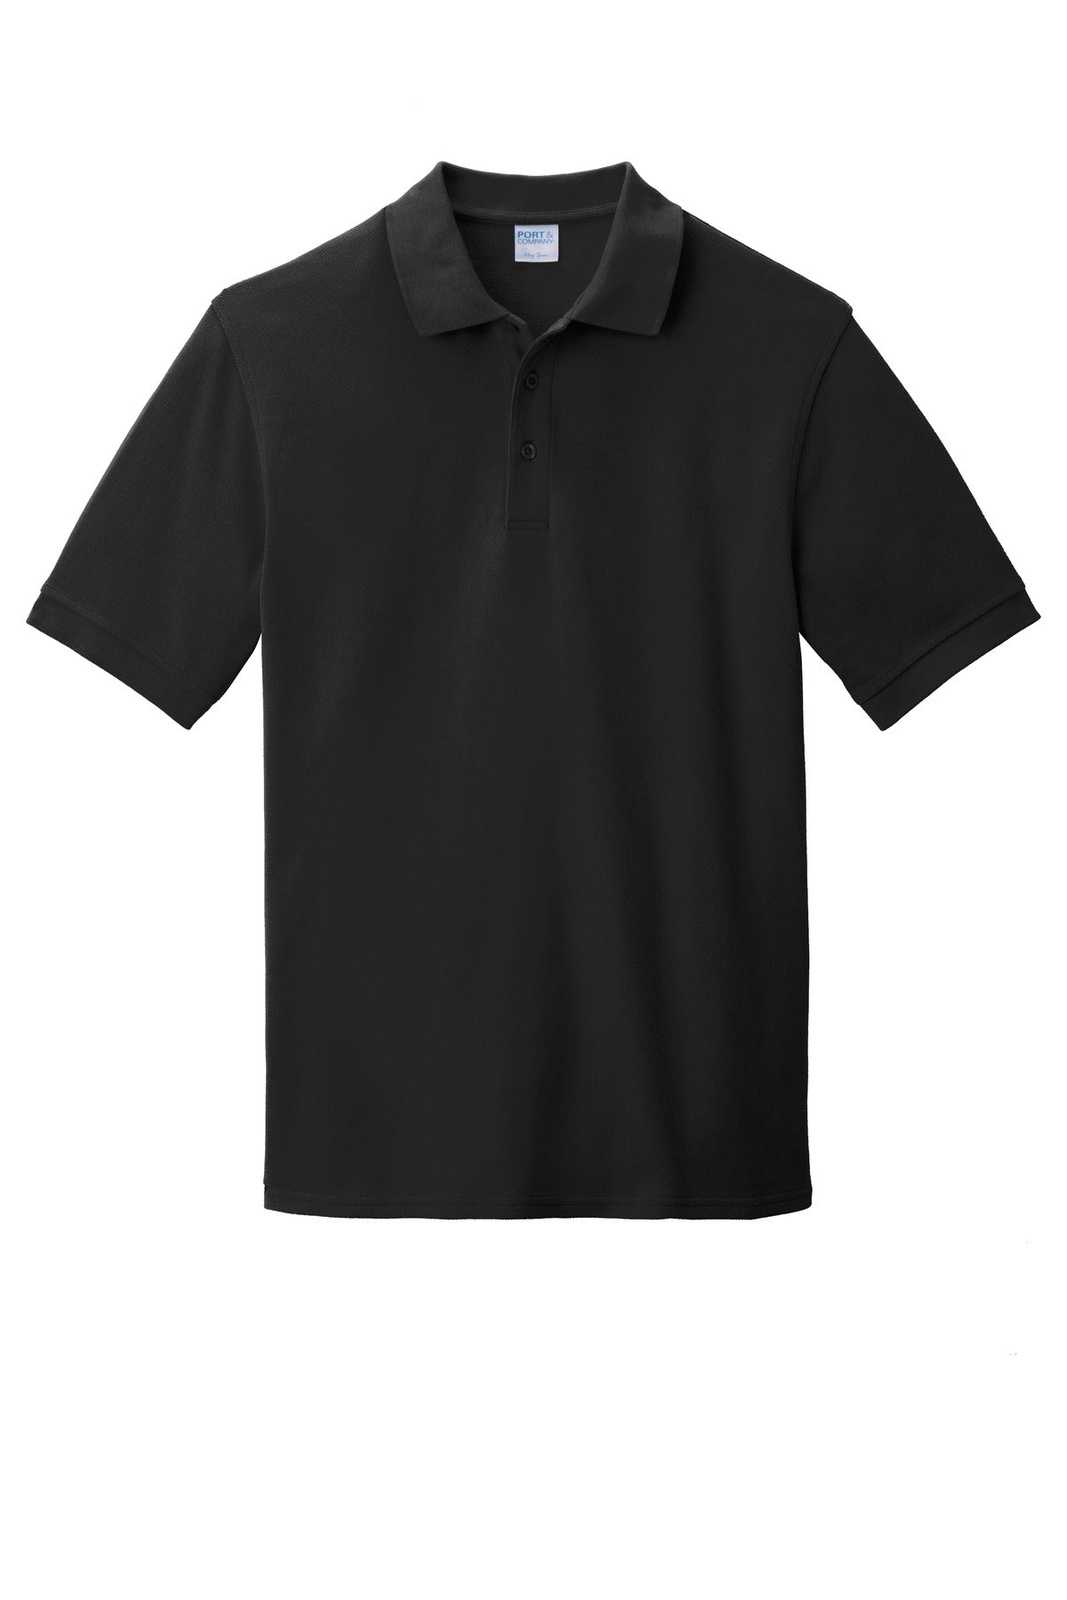 Port &amp; Company KP1500 Combed Ring Spun Pique Polo - Jet Black - HIT a Double - 5